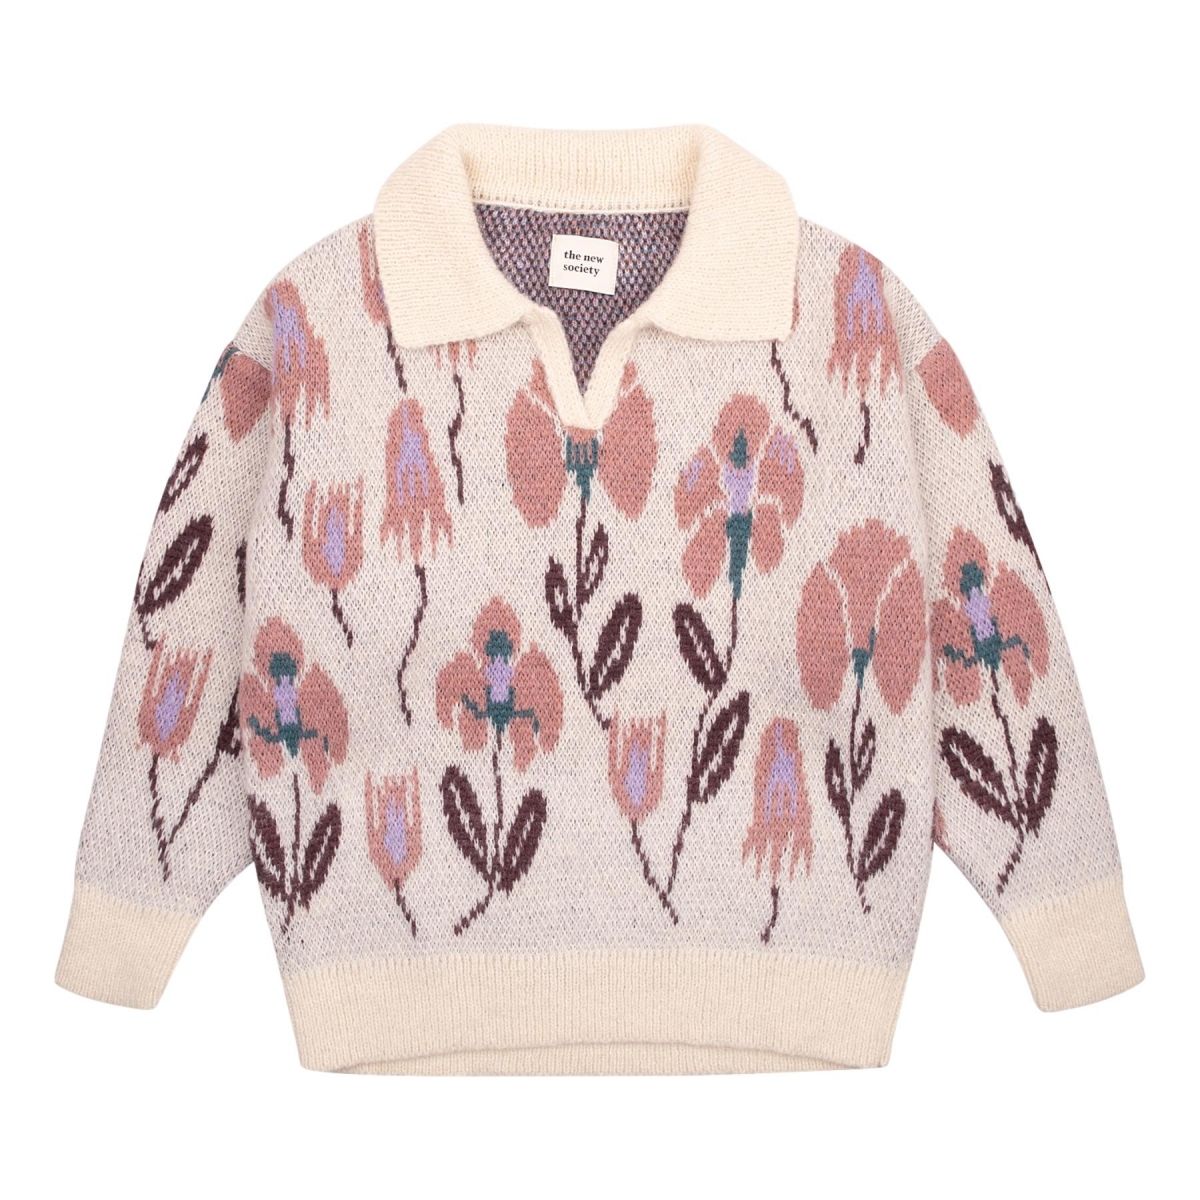 The New Society Matilde Jumper pink FW20KT800701 